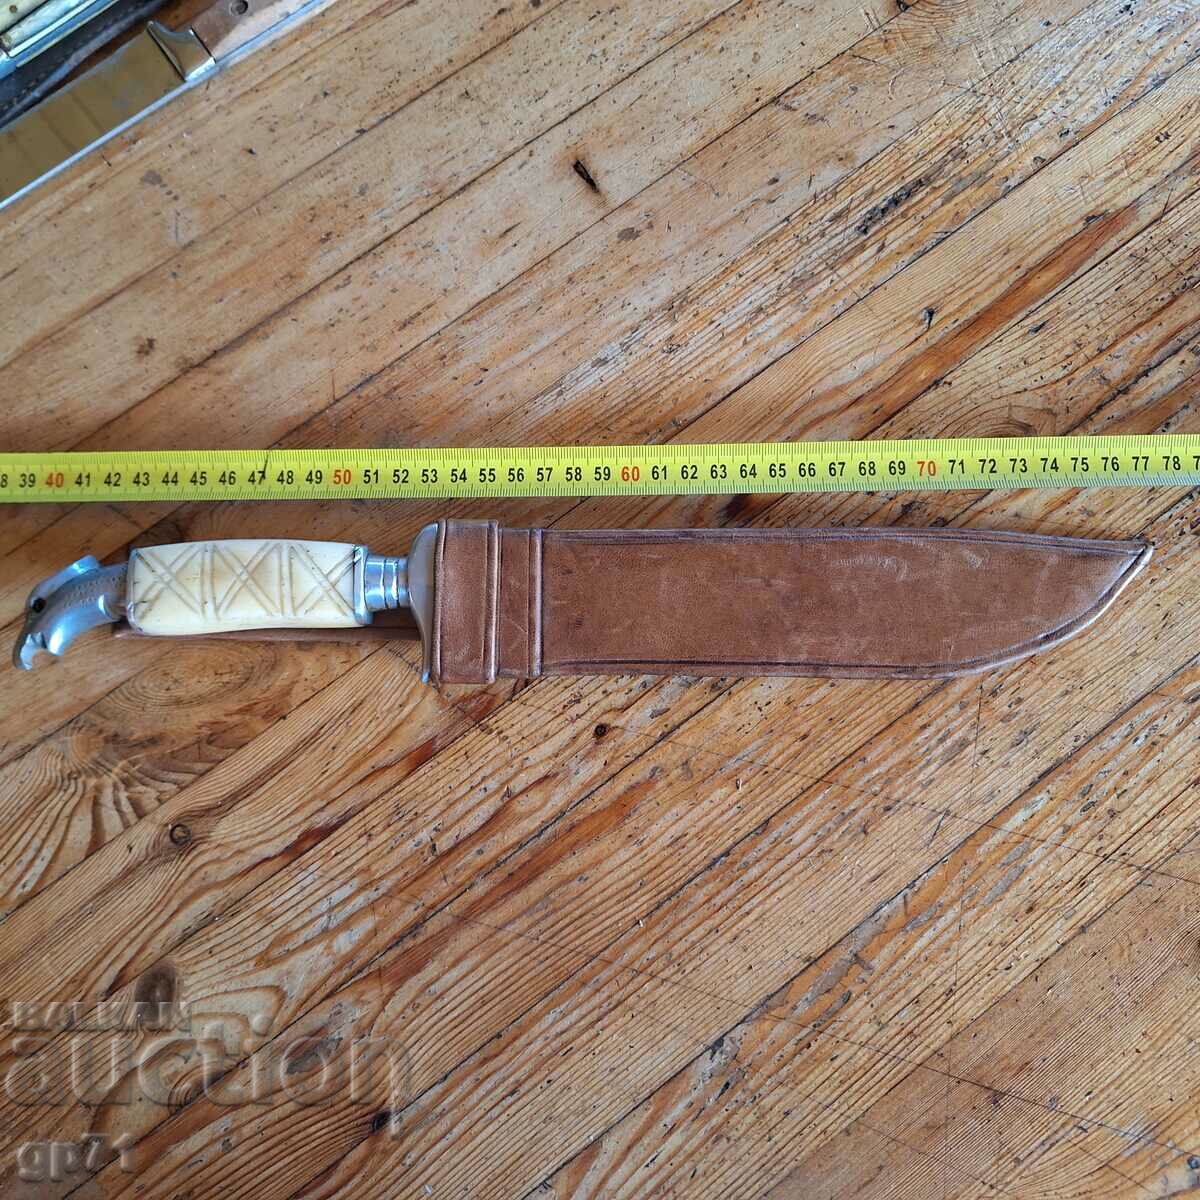 Mexican master knife by D.Vasquez